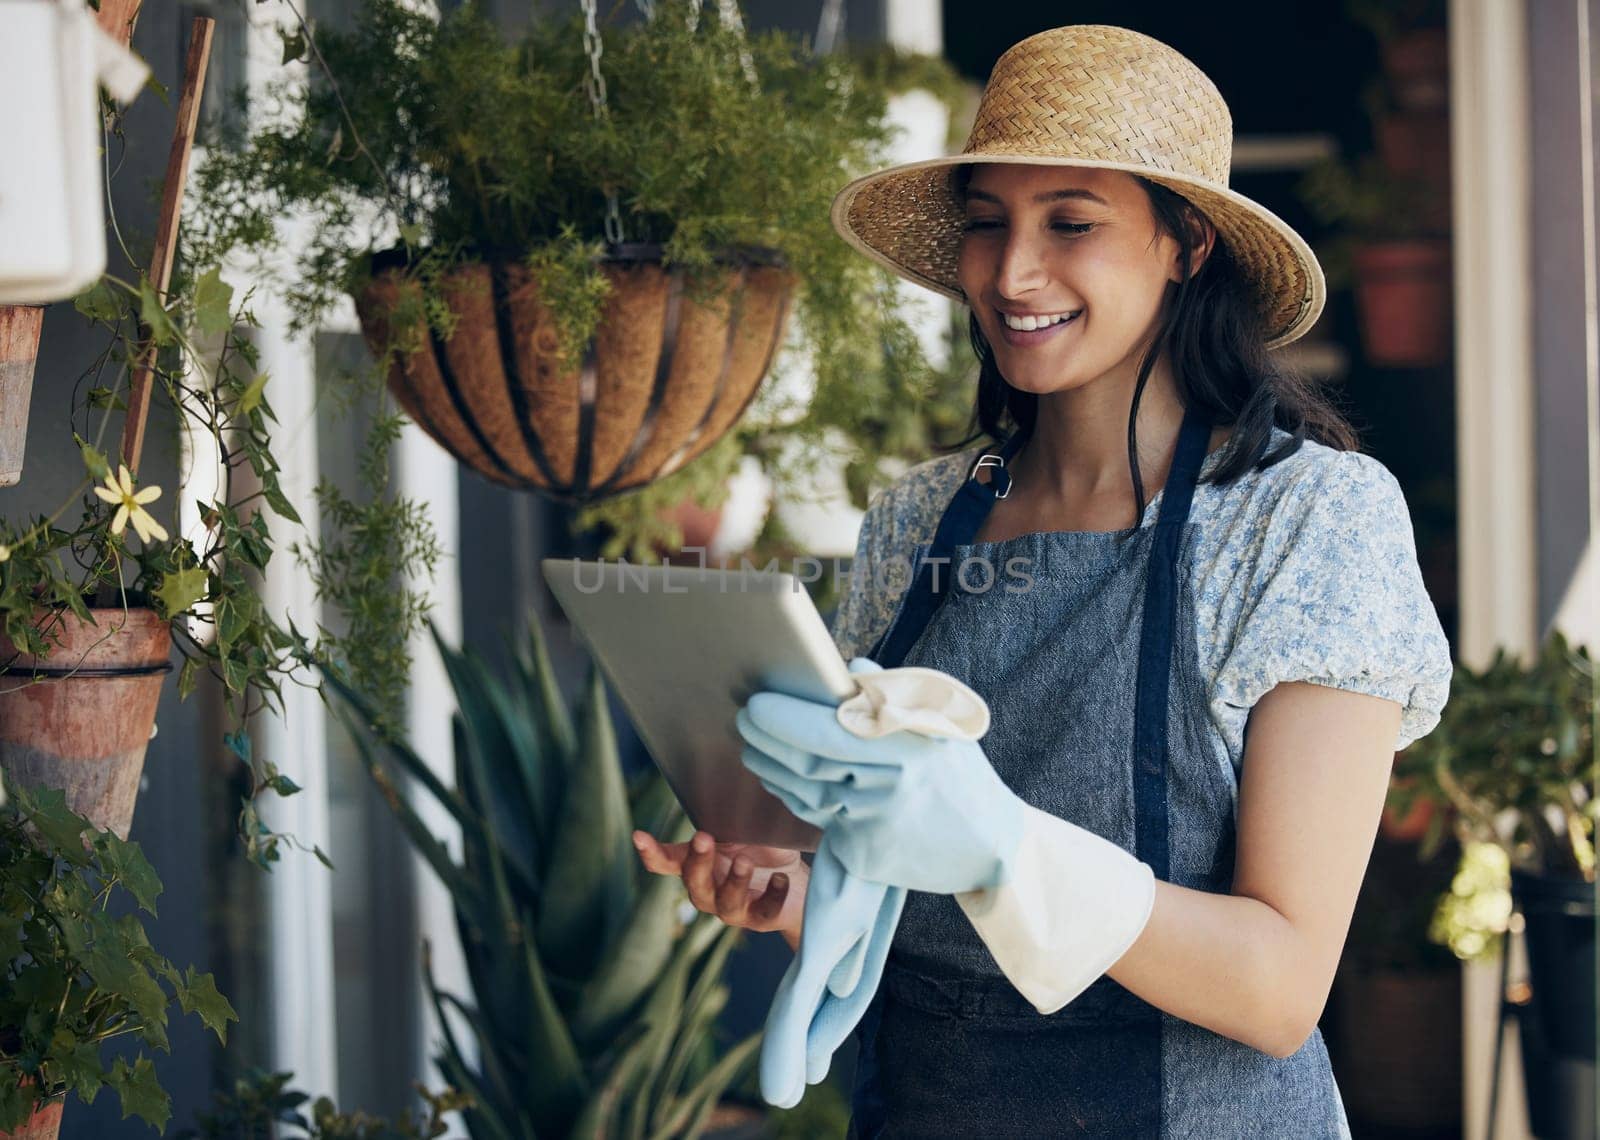 Florist, tablet or woman in nature for flowers for growth, ecology development or agriculture business. Gardener, nursery and girl farming for plants, horticulture research and floral results online.